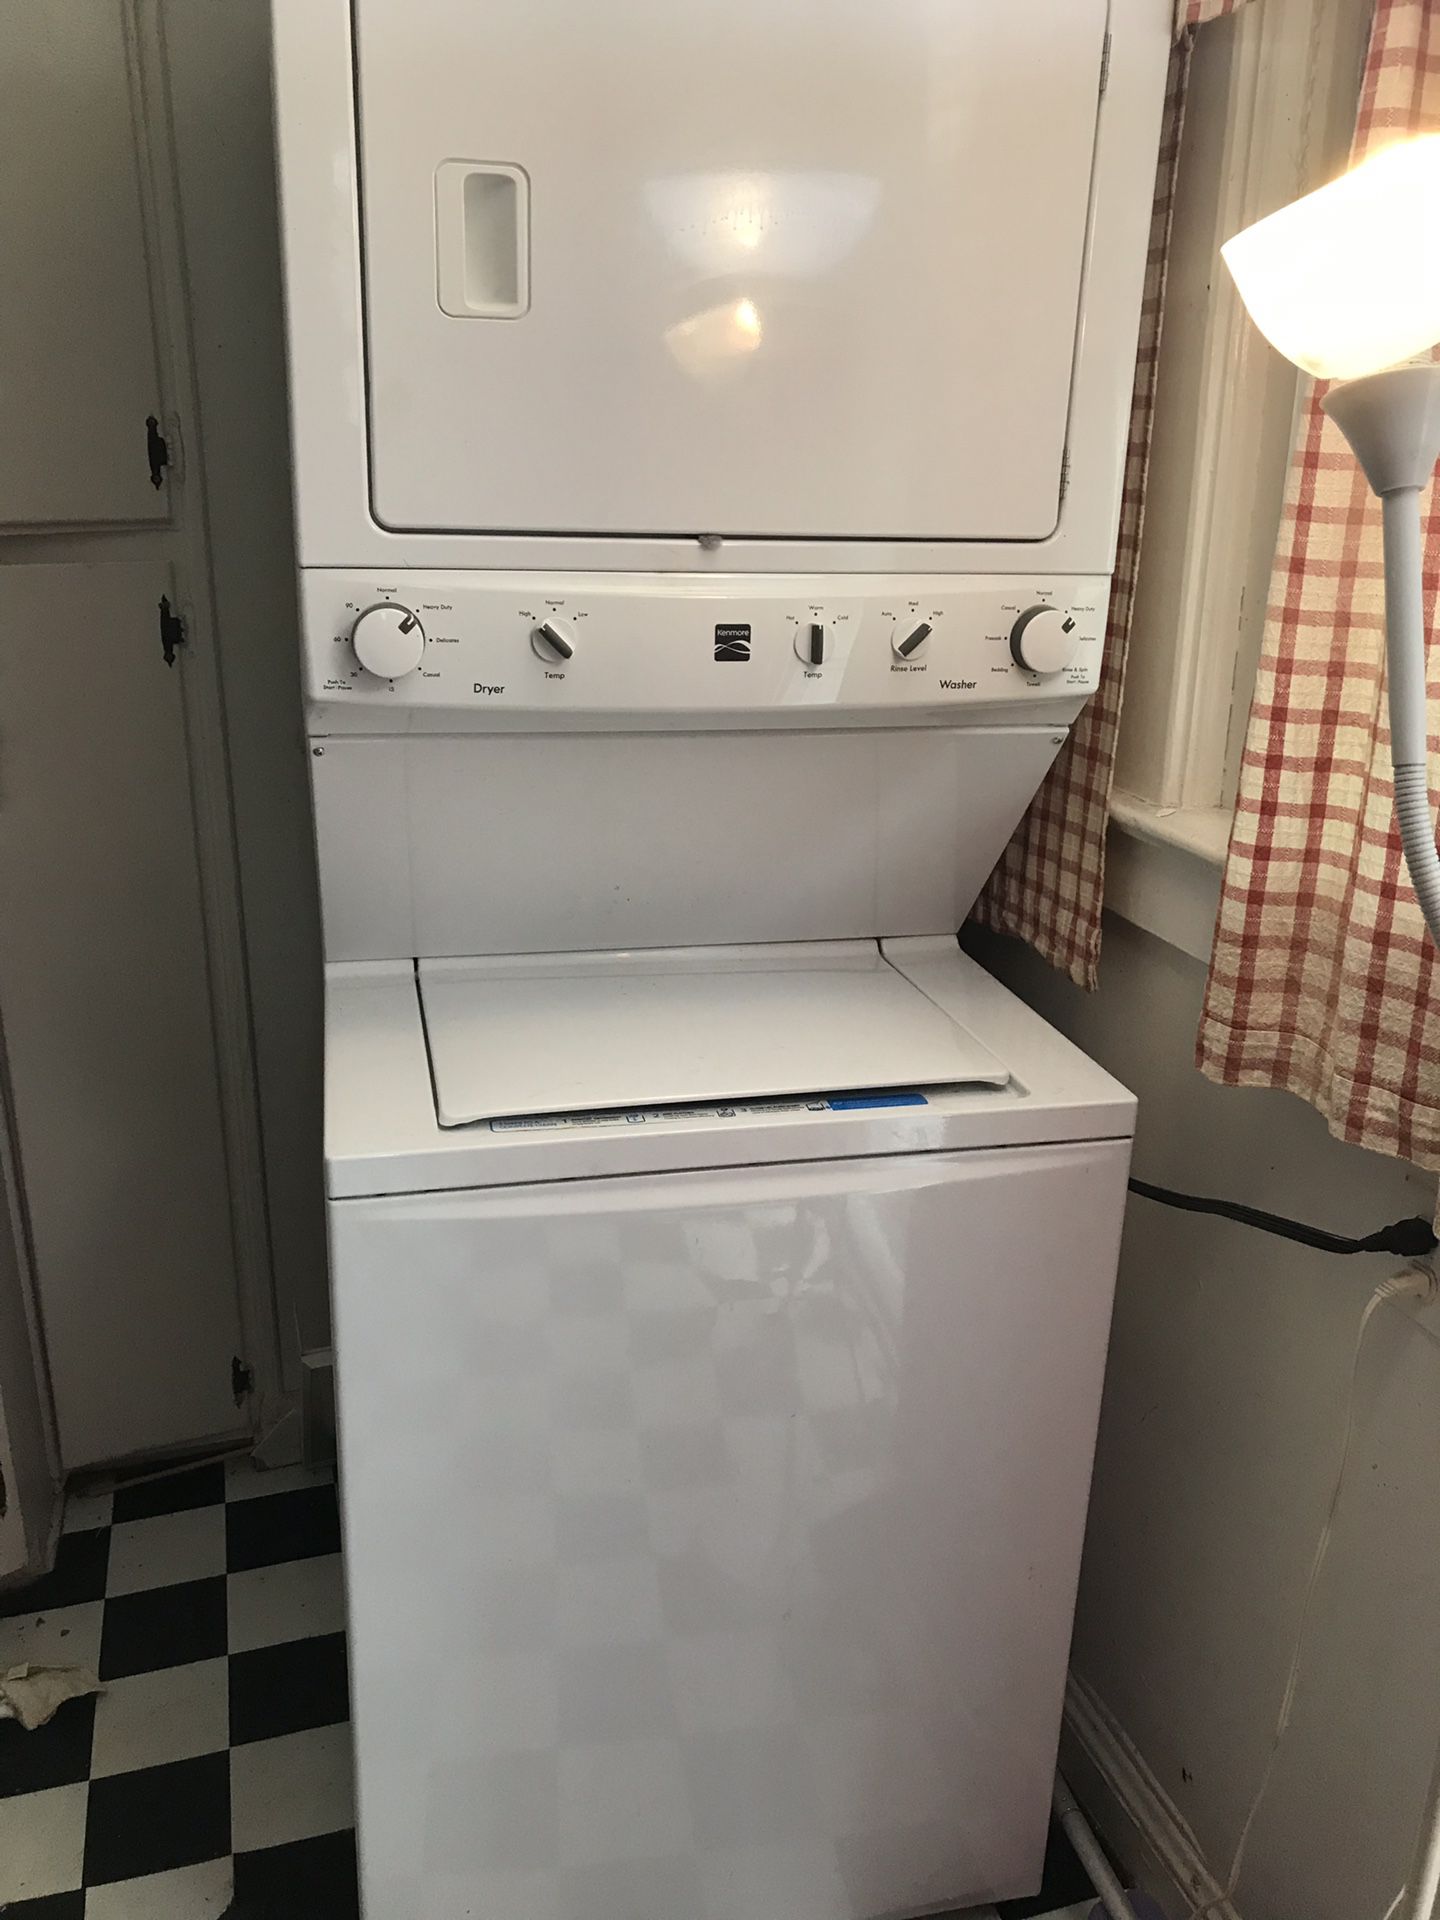 Kenmore washer/dryer combo.